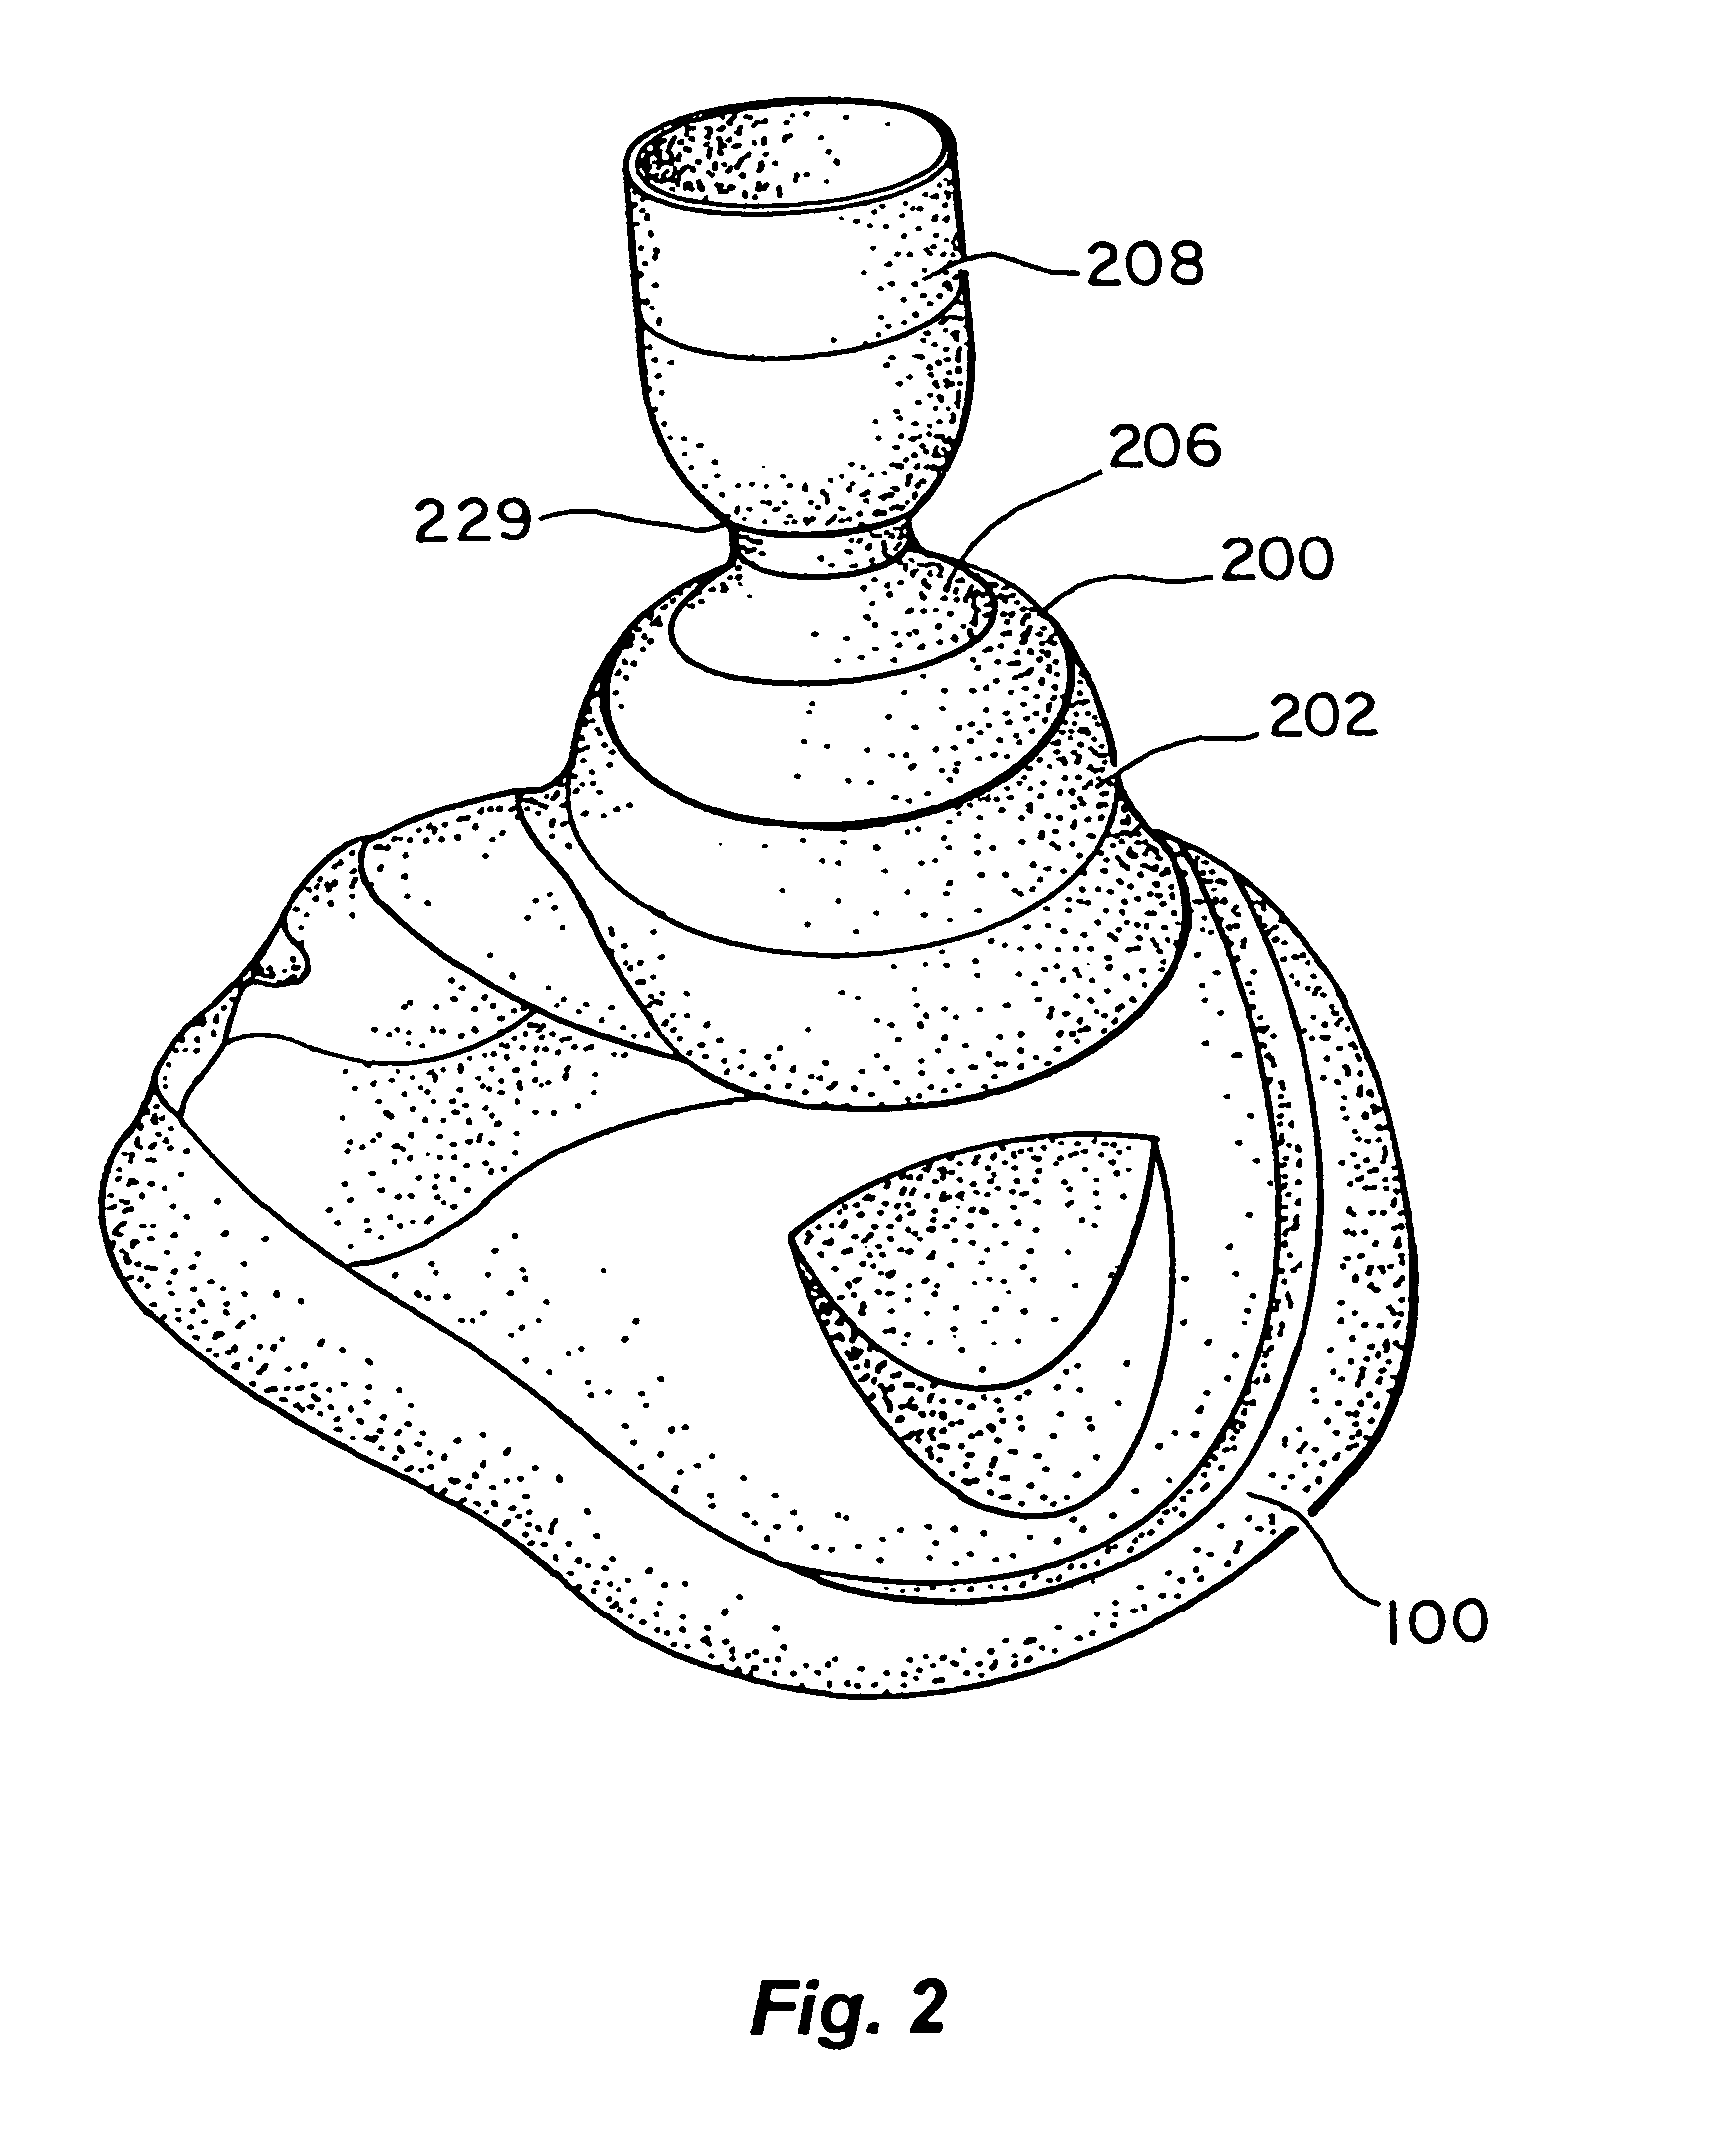 Ventilator and methods for treating head trauma and low blood circulation